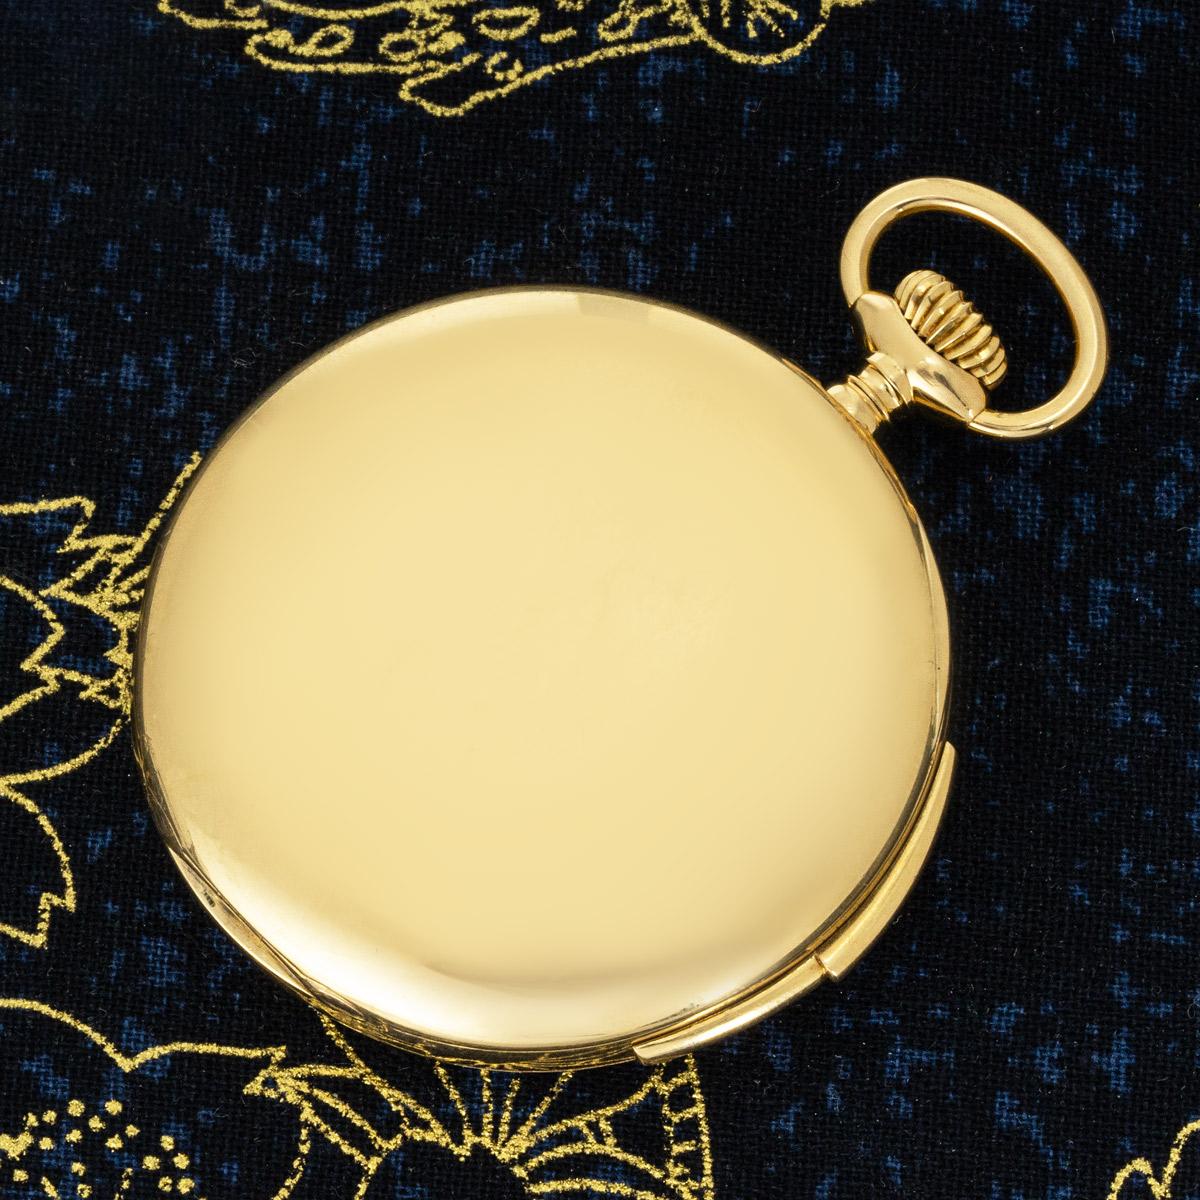 Vacheron & Constantin. A Yellow Gold Minute Repeater Pocket watch C1920 For Sale 1